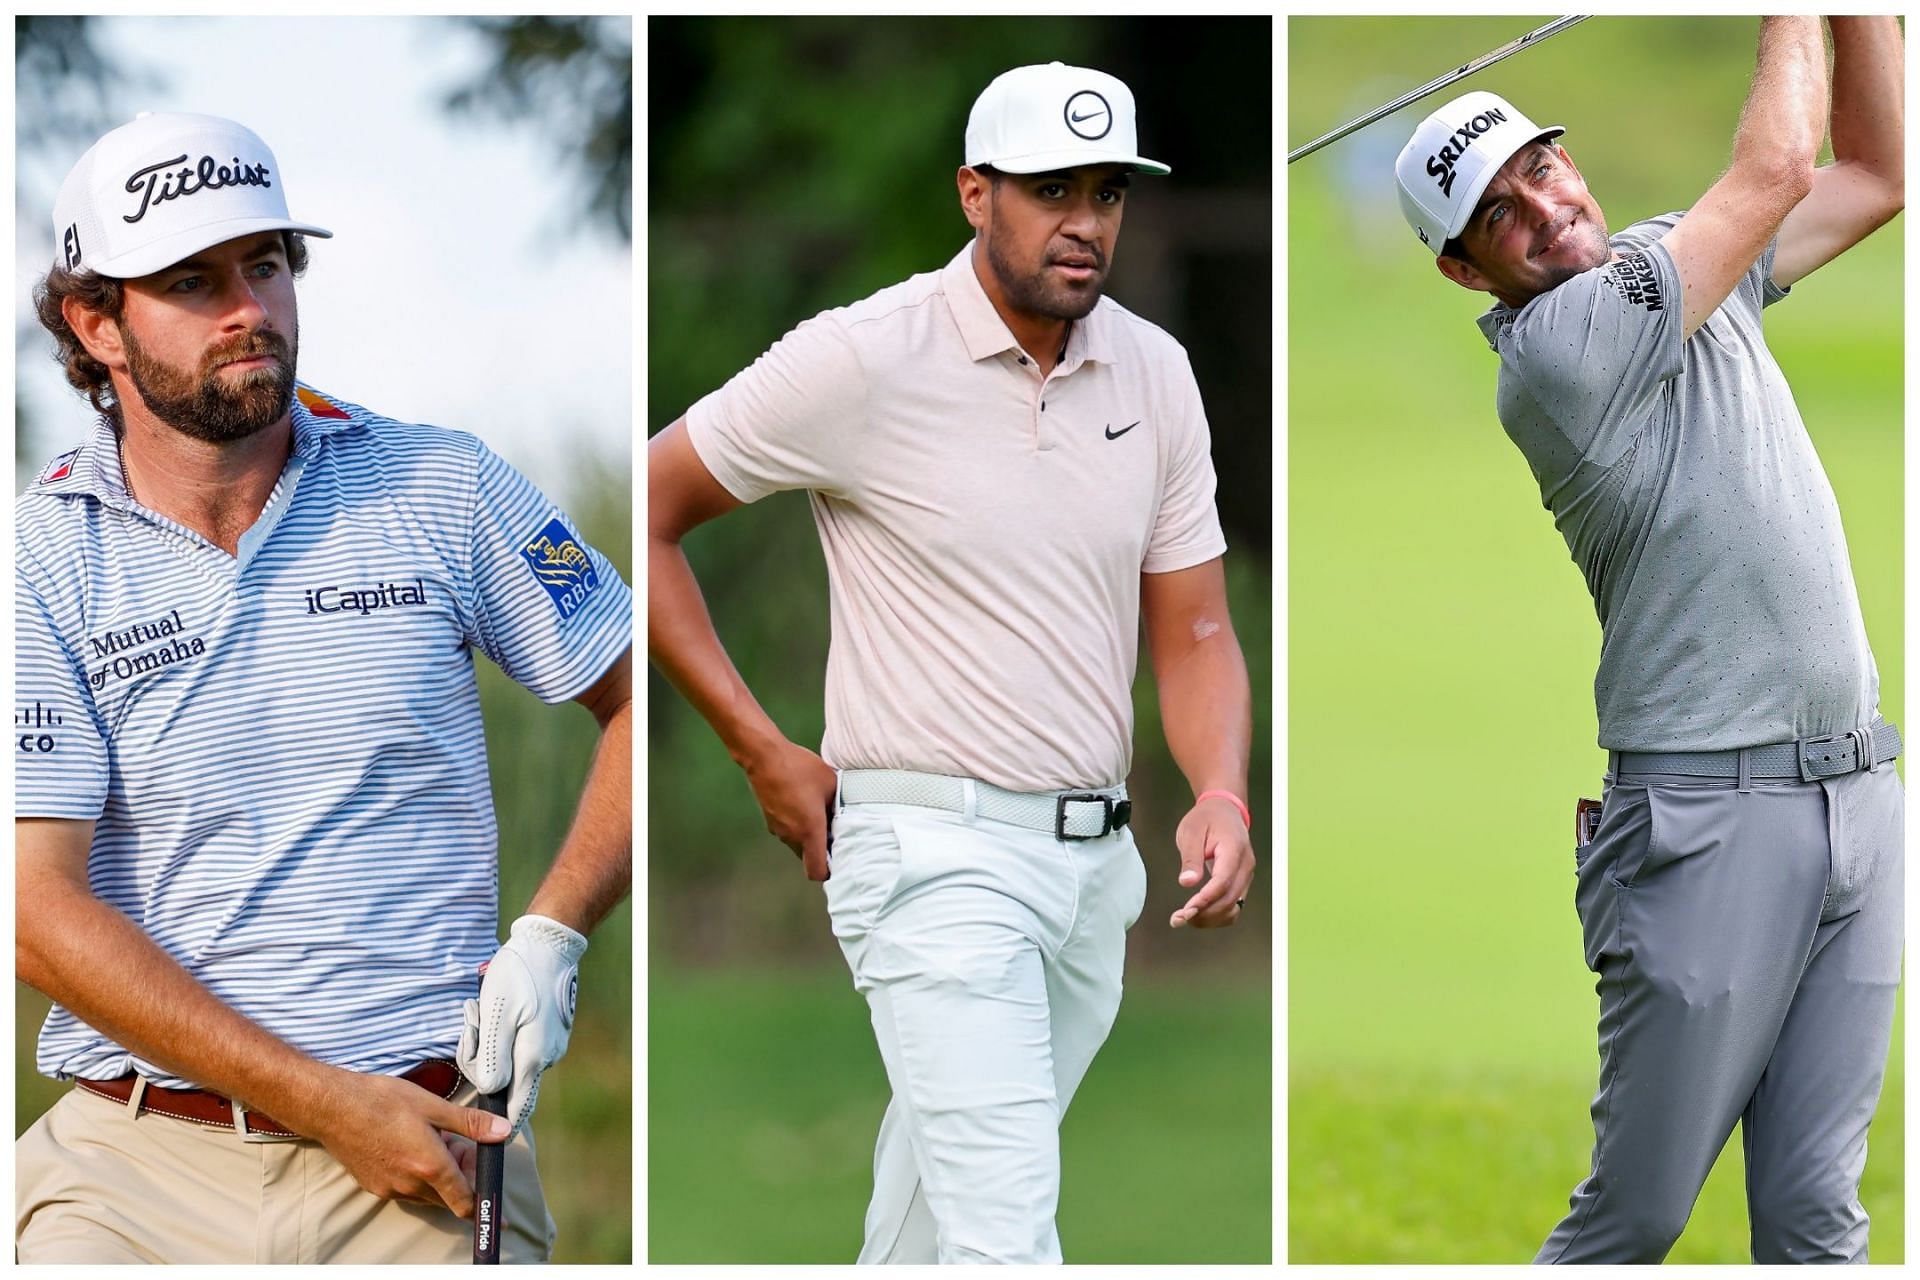 Cameron Young, Tony Finau and Keegan Bradley are top-ranked players missing from Ryder Cup squad